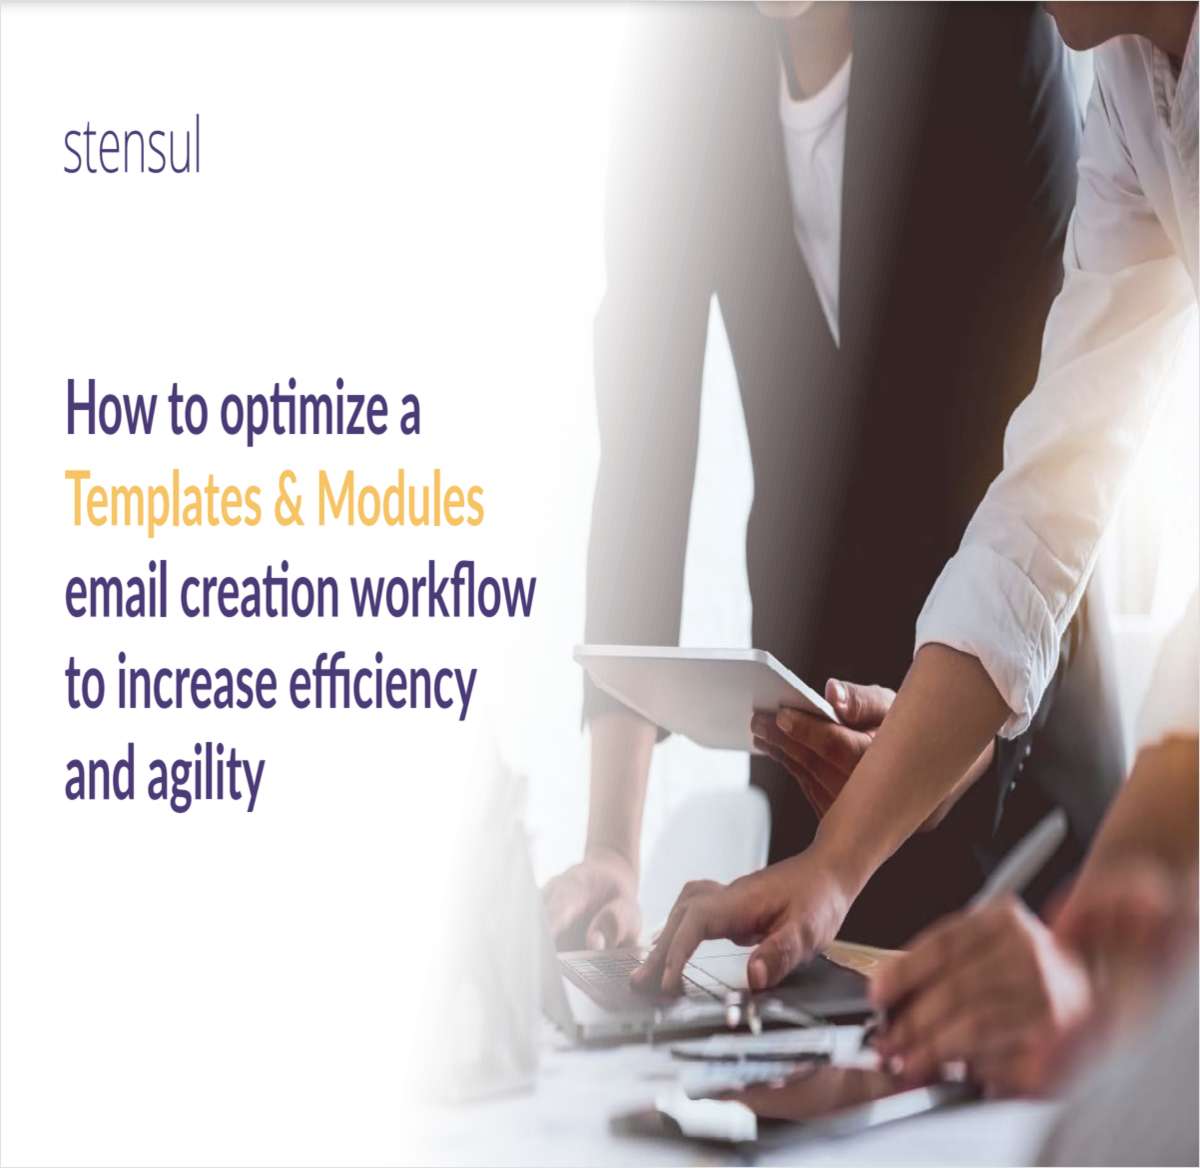 How to optimize a Templates & Modules email creation workflow to increase efficiency and agility